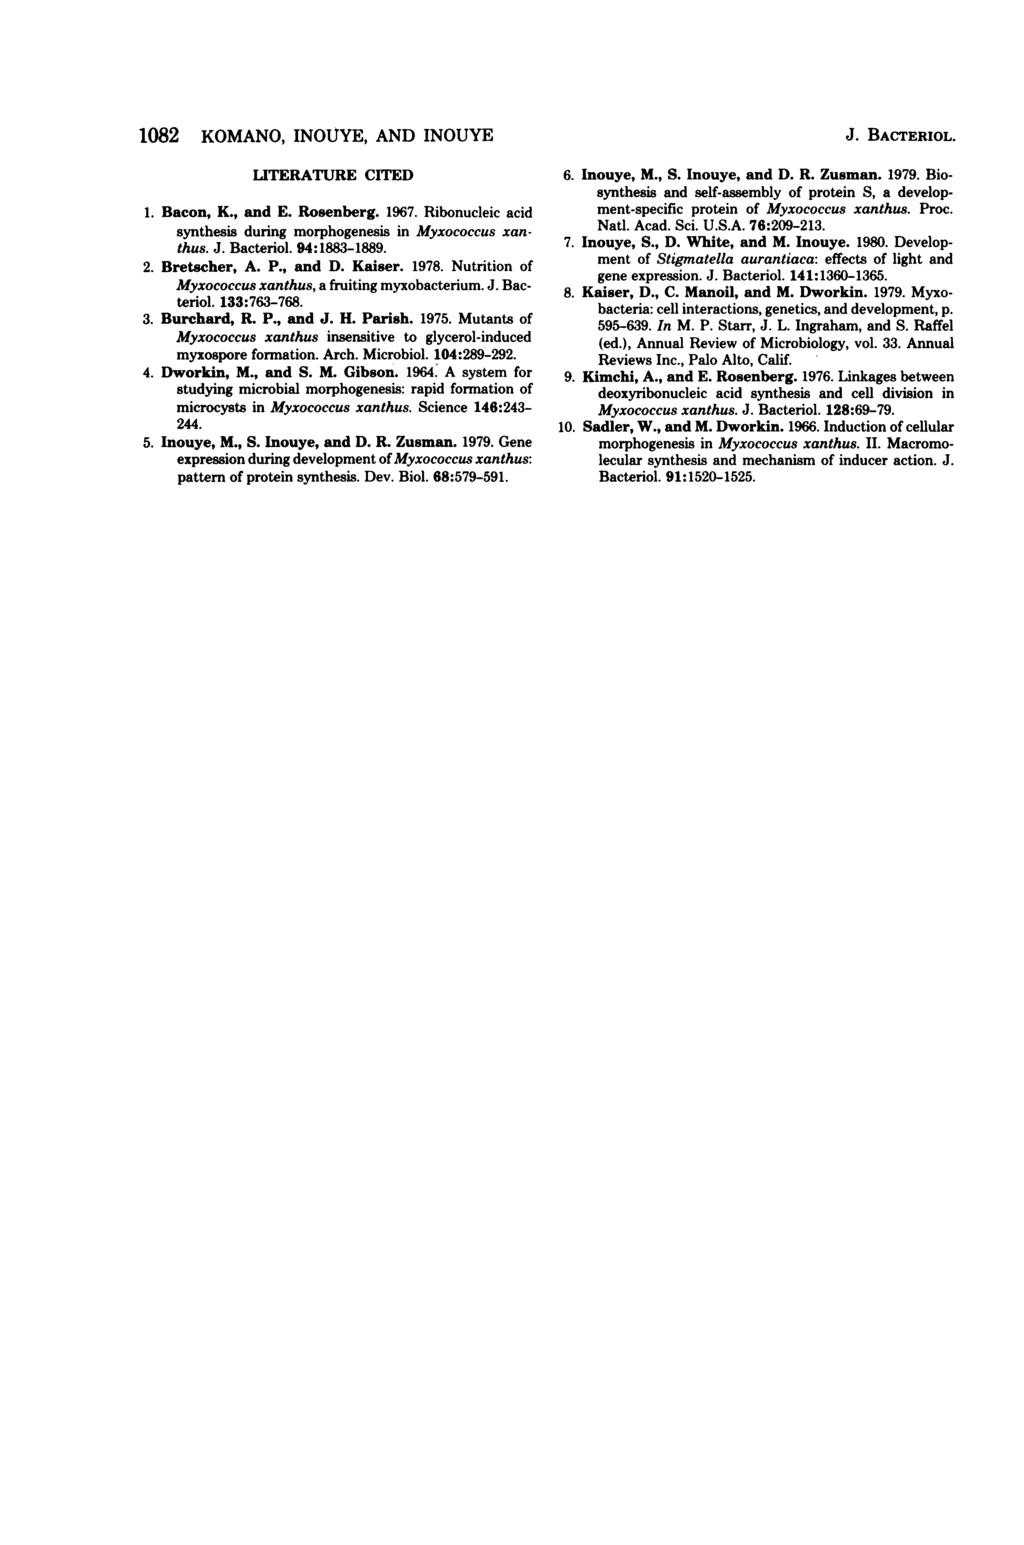 1082 KOMANO, INOUYE, AND INOUYE LITERATURE CITED 1. Bacon, K., and E. Rosenberg. 1967. Ribonucleic acid synthesis during morphogenesis in Myxococcus xanthus. J. Bacteriol. 94:1883-1889. 2.